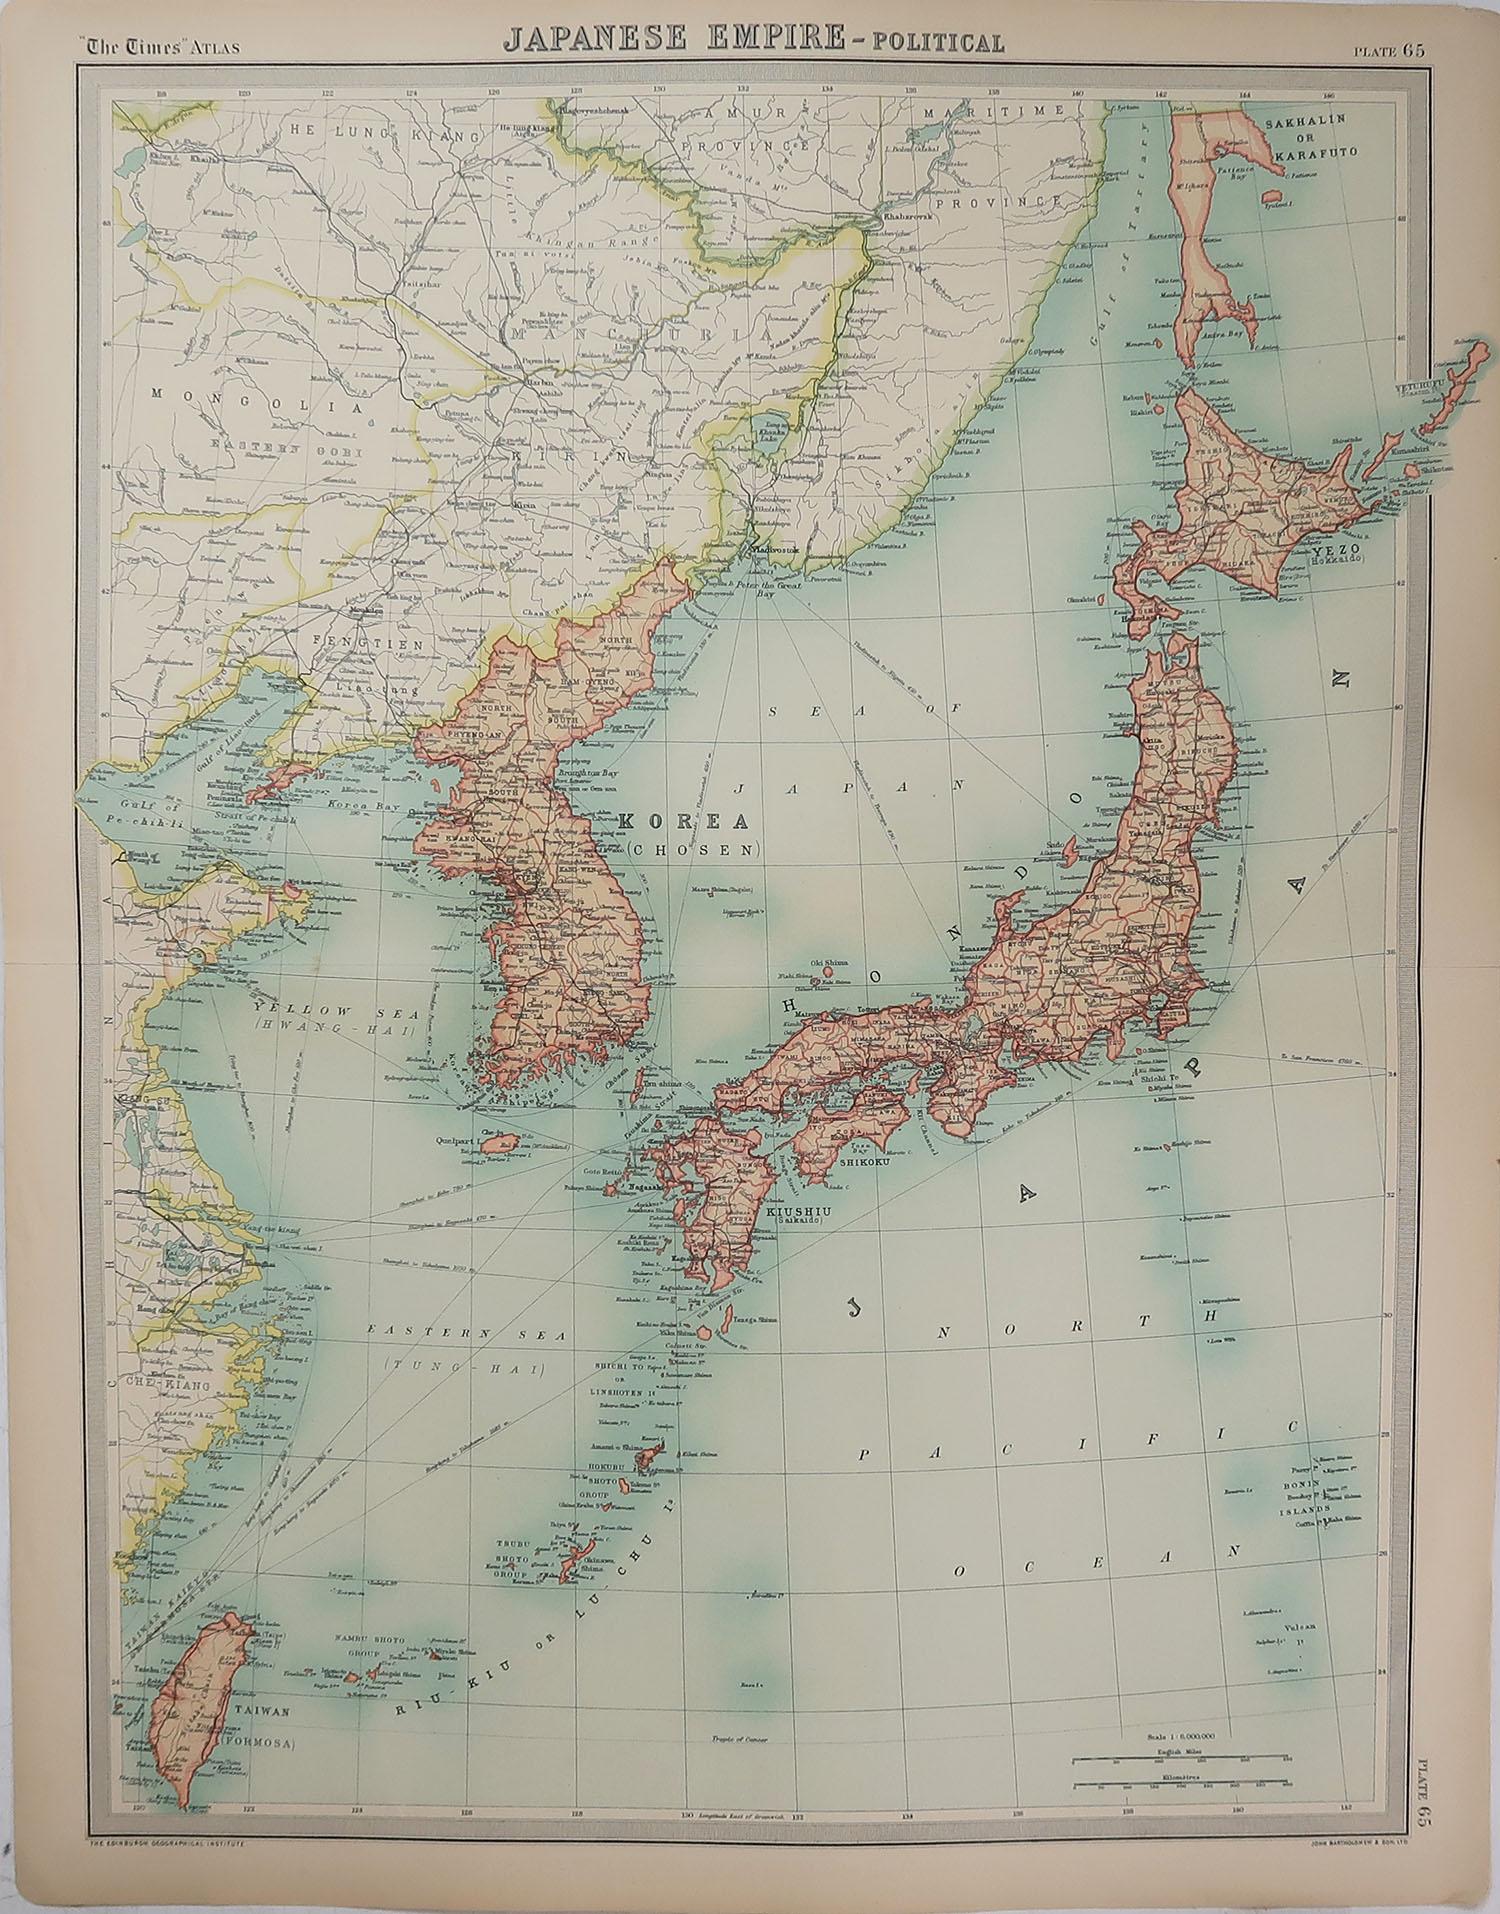 Great maps of Japan

Unframed

Original color

By John Bartholomew and Co. Edinburgh Geographical Institute

Published, circa 1920

Free shipping.
  